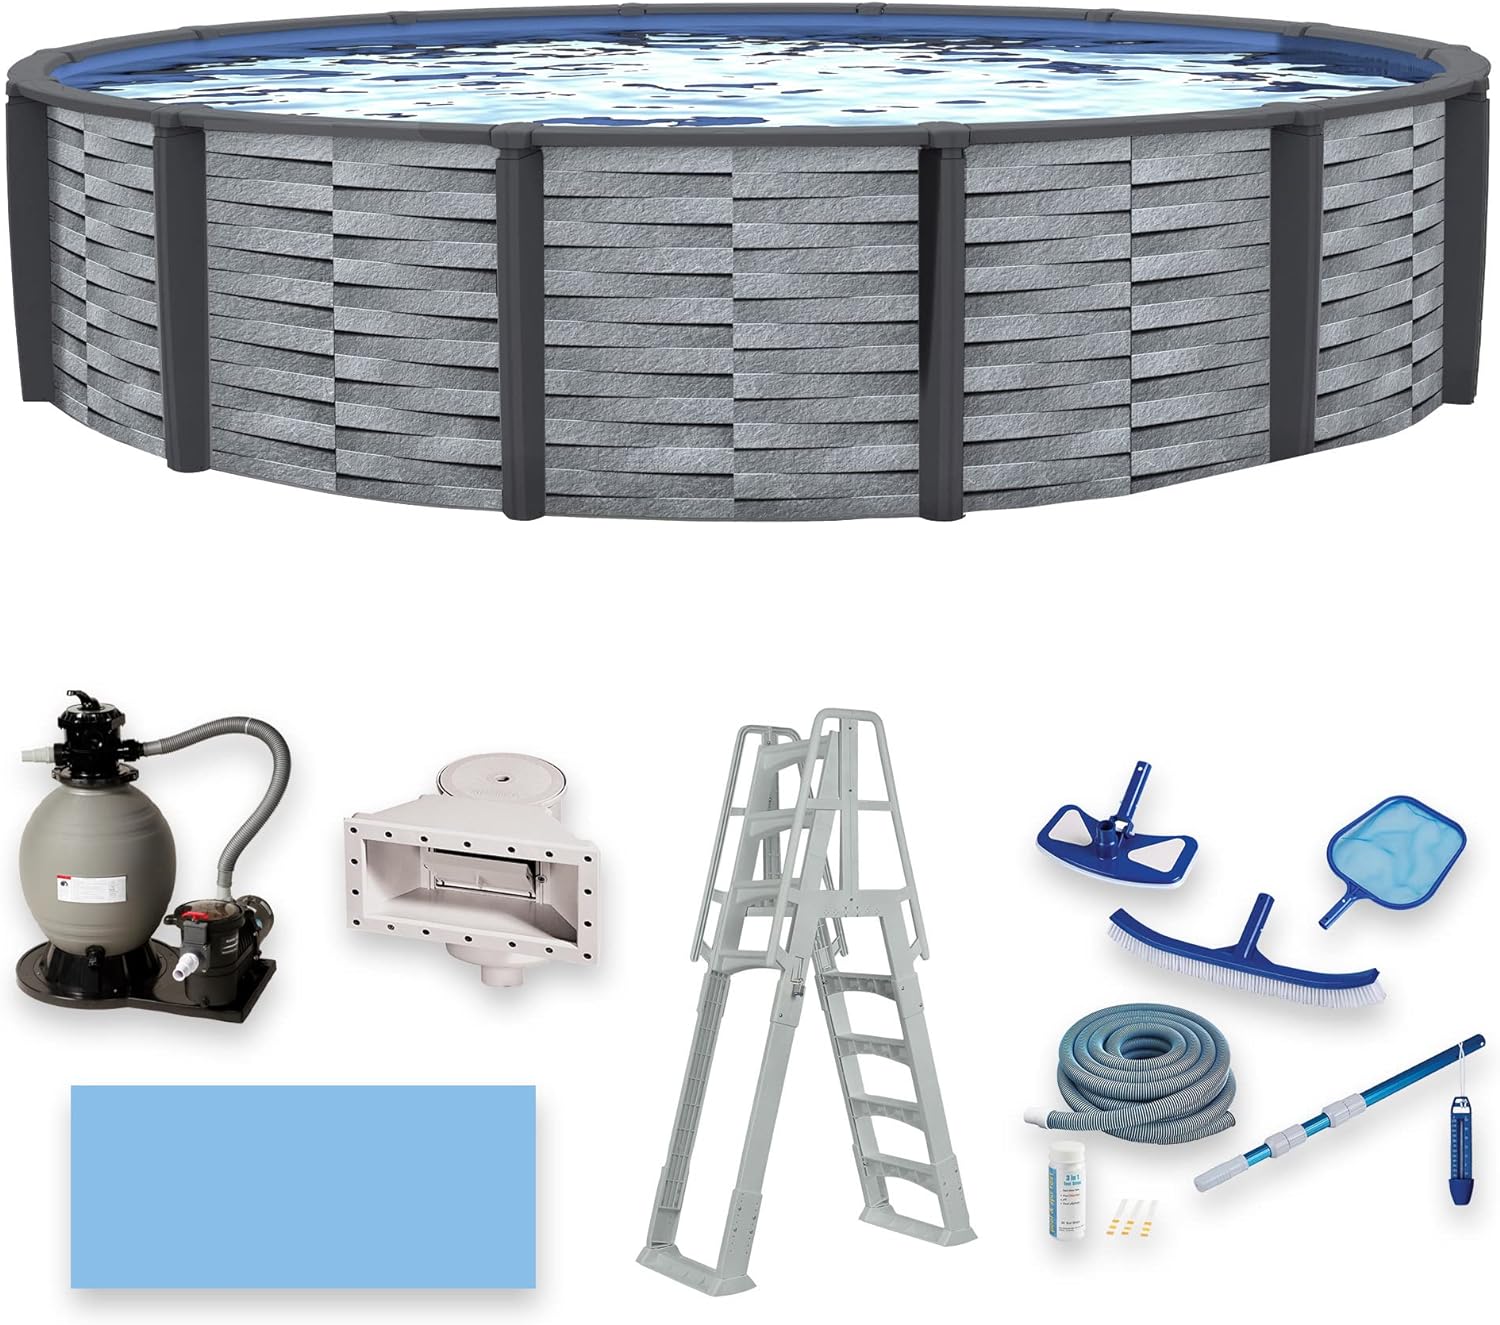 Affinity 18' Round 52" Deep 7" Top Rail Resin Above Ground Swimming Pool Package